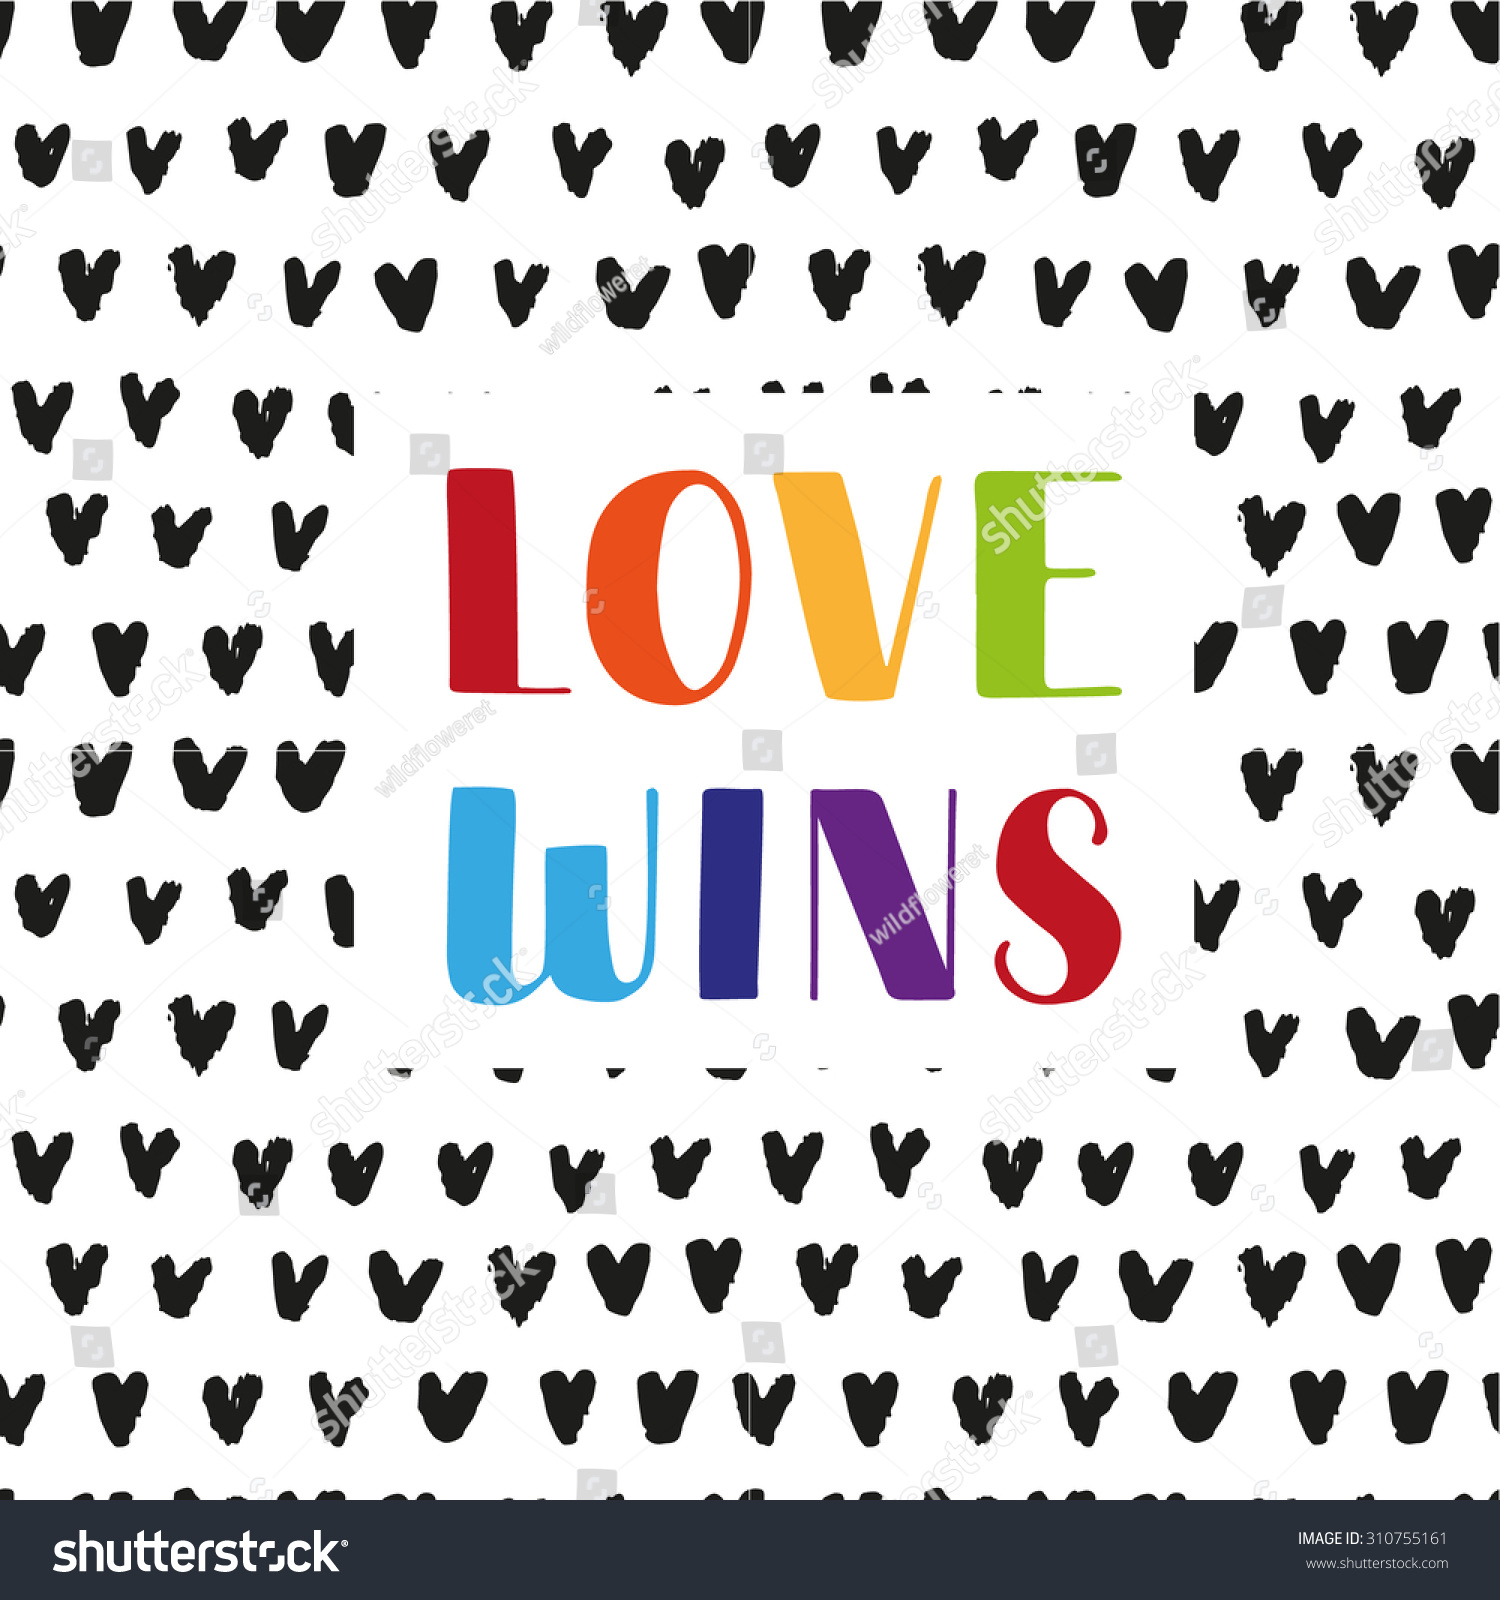 Download Love Wins Hand Drawn Background Your Stock Vector (Royalty ...